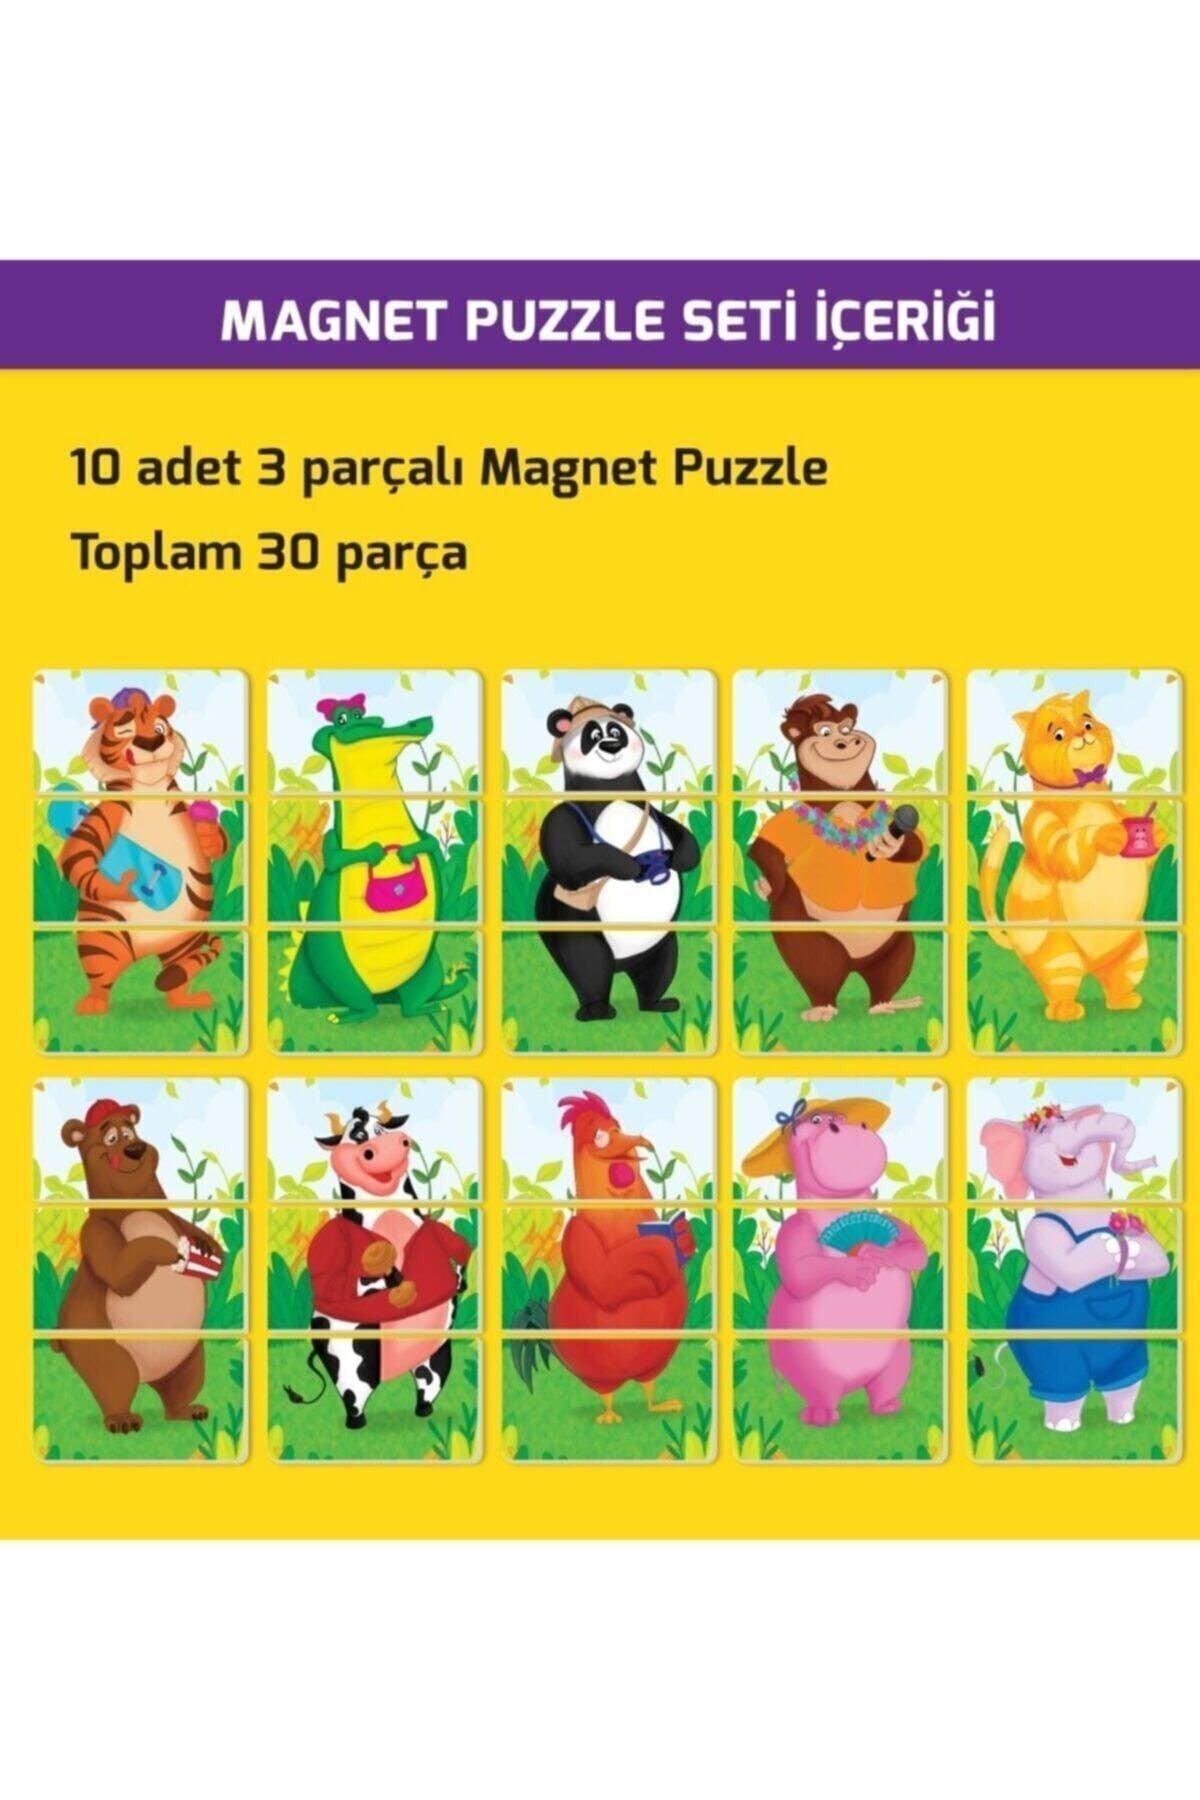 Rising Intelligence Age 2+ Magnet Puzzle Attention Developing Intelligence Game - Swordslife